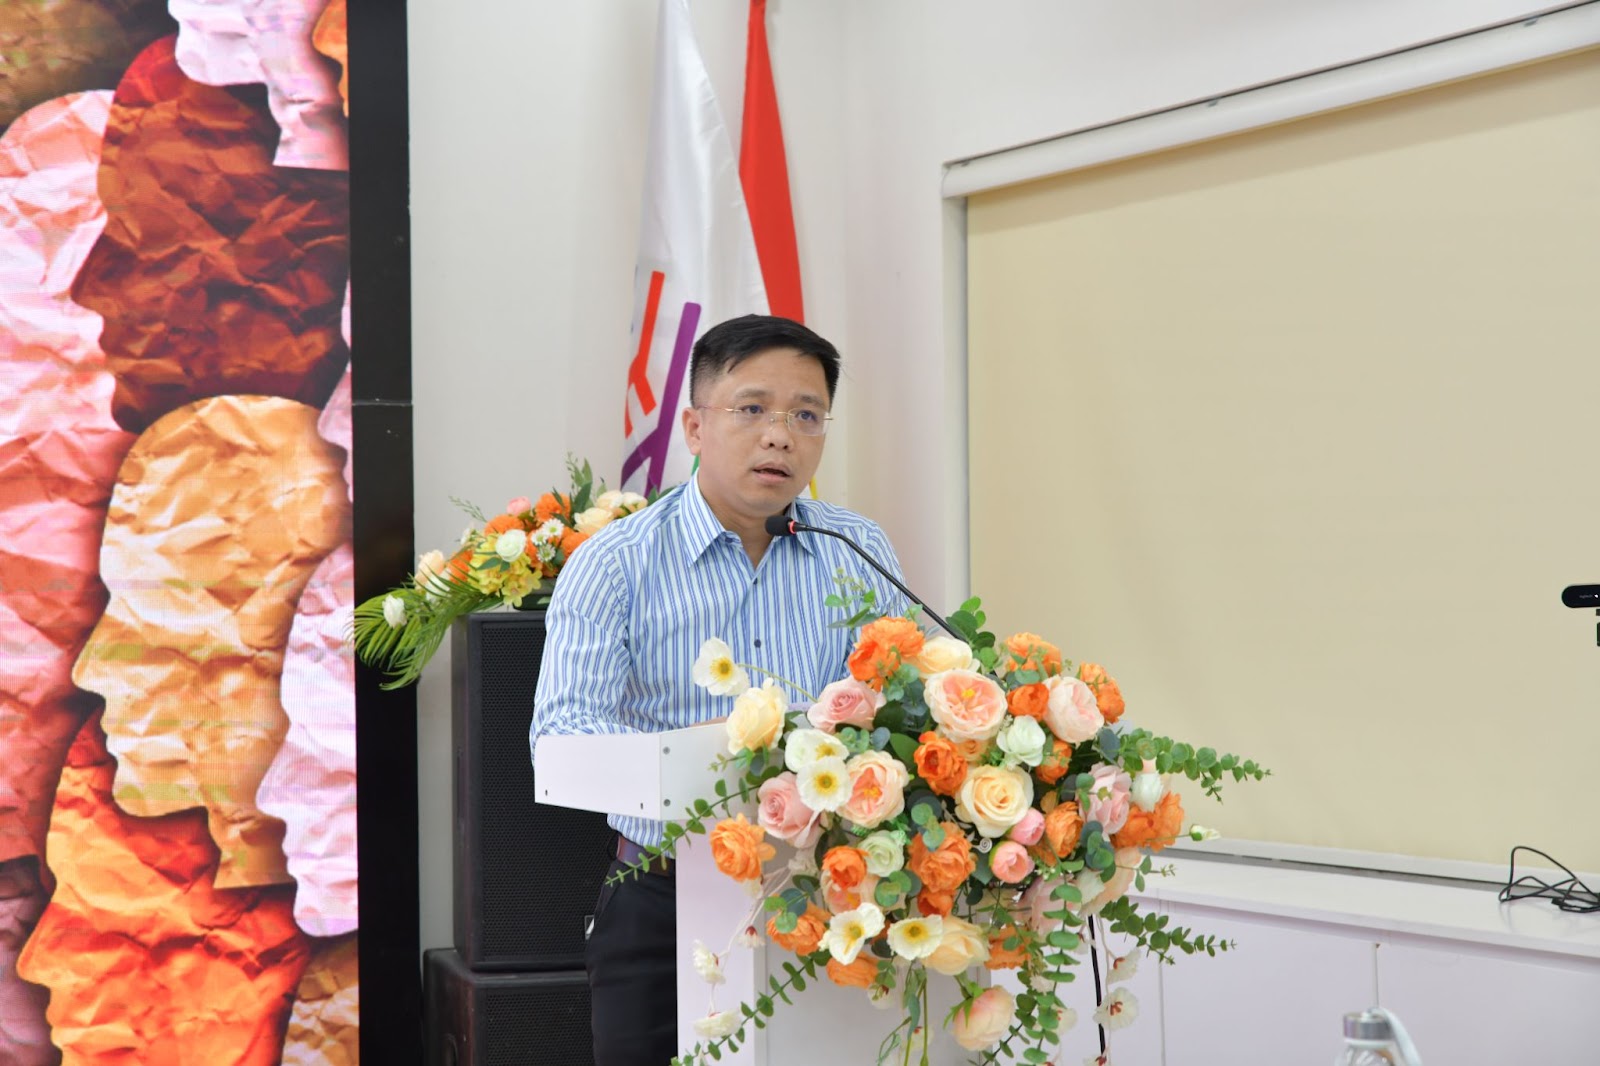 Mr. Bùi Thanh Tuấn, from the Institute of Strategy and Science of the Ministry of Public Security, with the presentation on 'Human Security and International Cooperation for Human Security in Vietnam.'